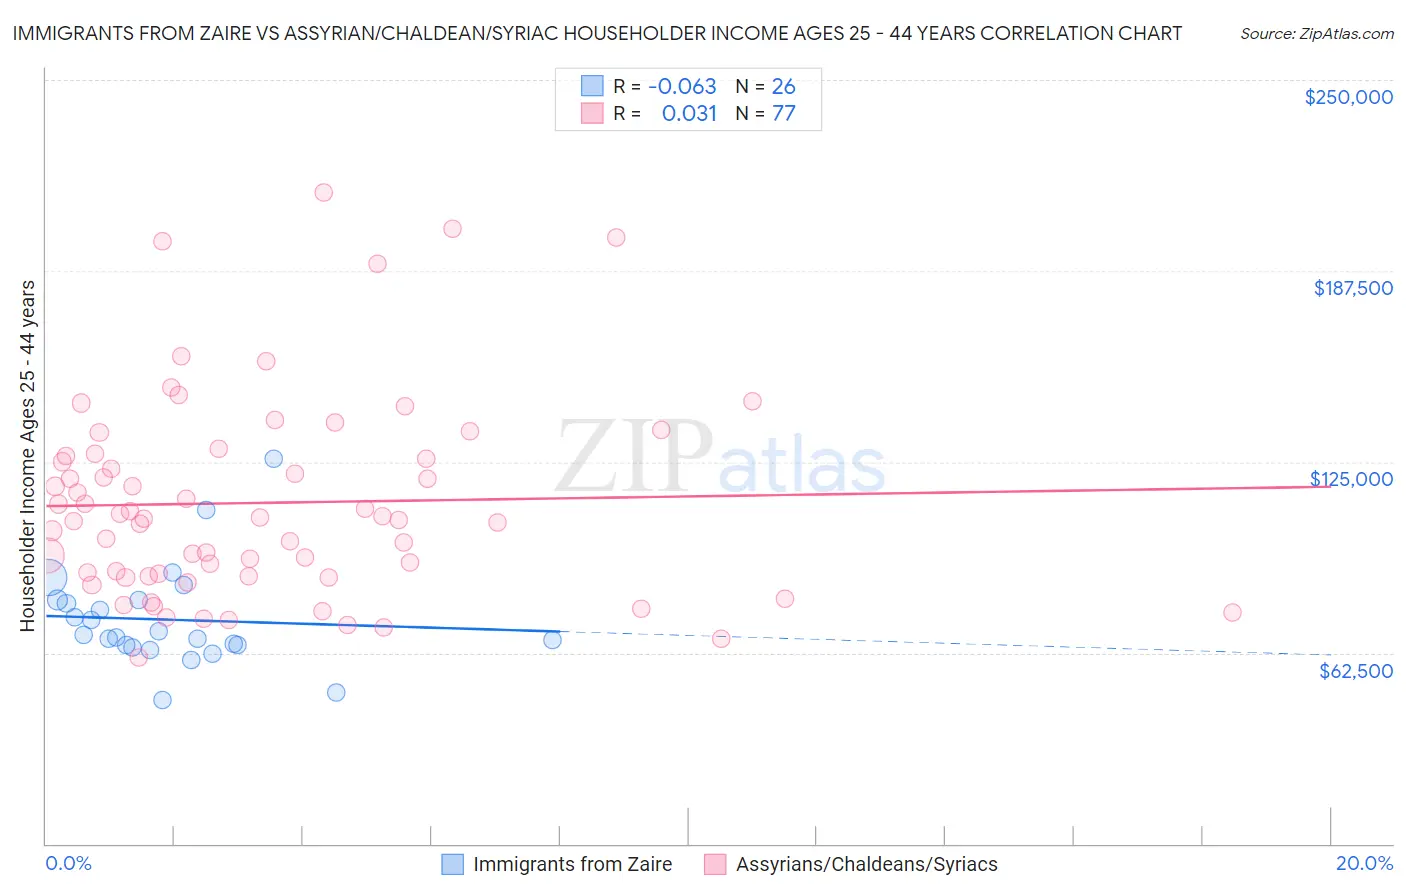 Immigrants from Zaire vs Assyrian/Chaldean/Syriac Householder Income Ages 25 - 44 years